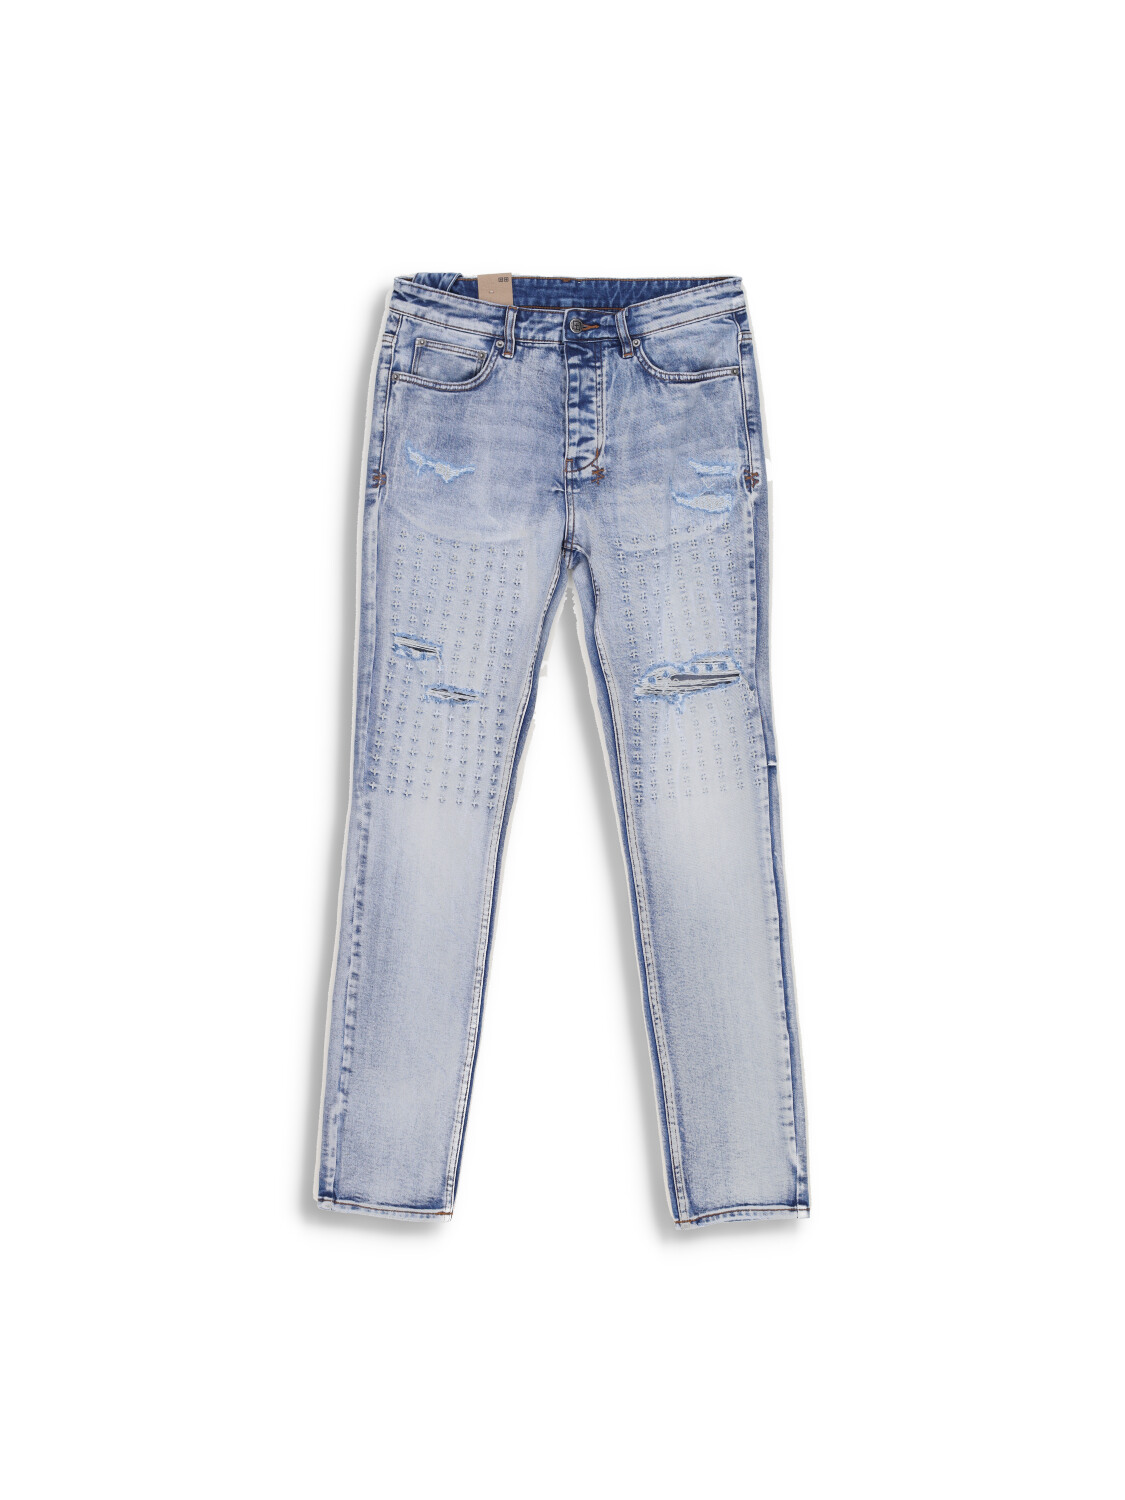 Chitch - Jeans with destroyed details and embroidery